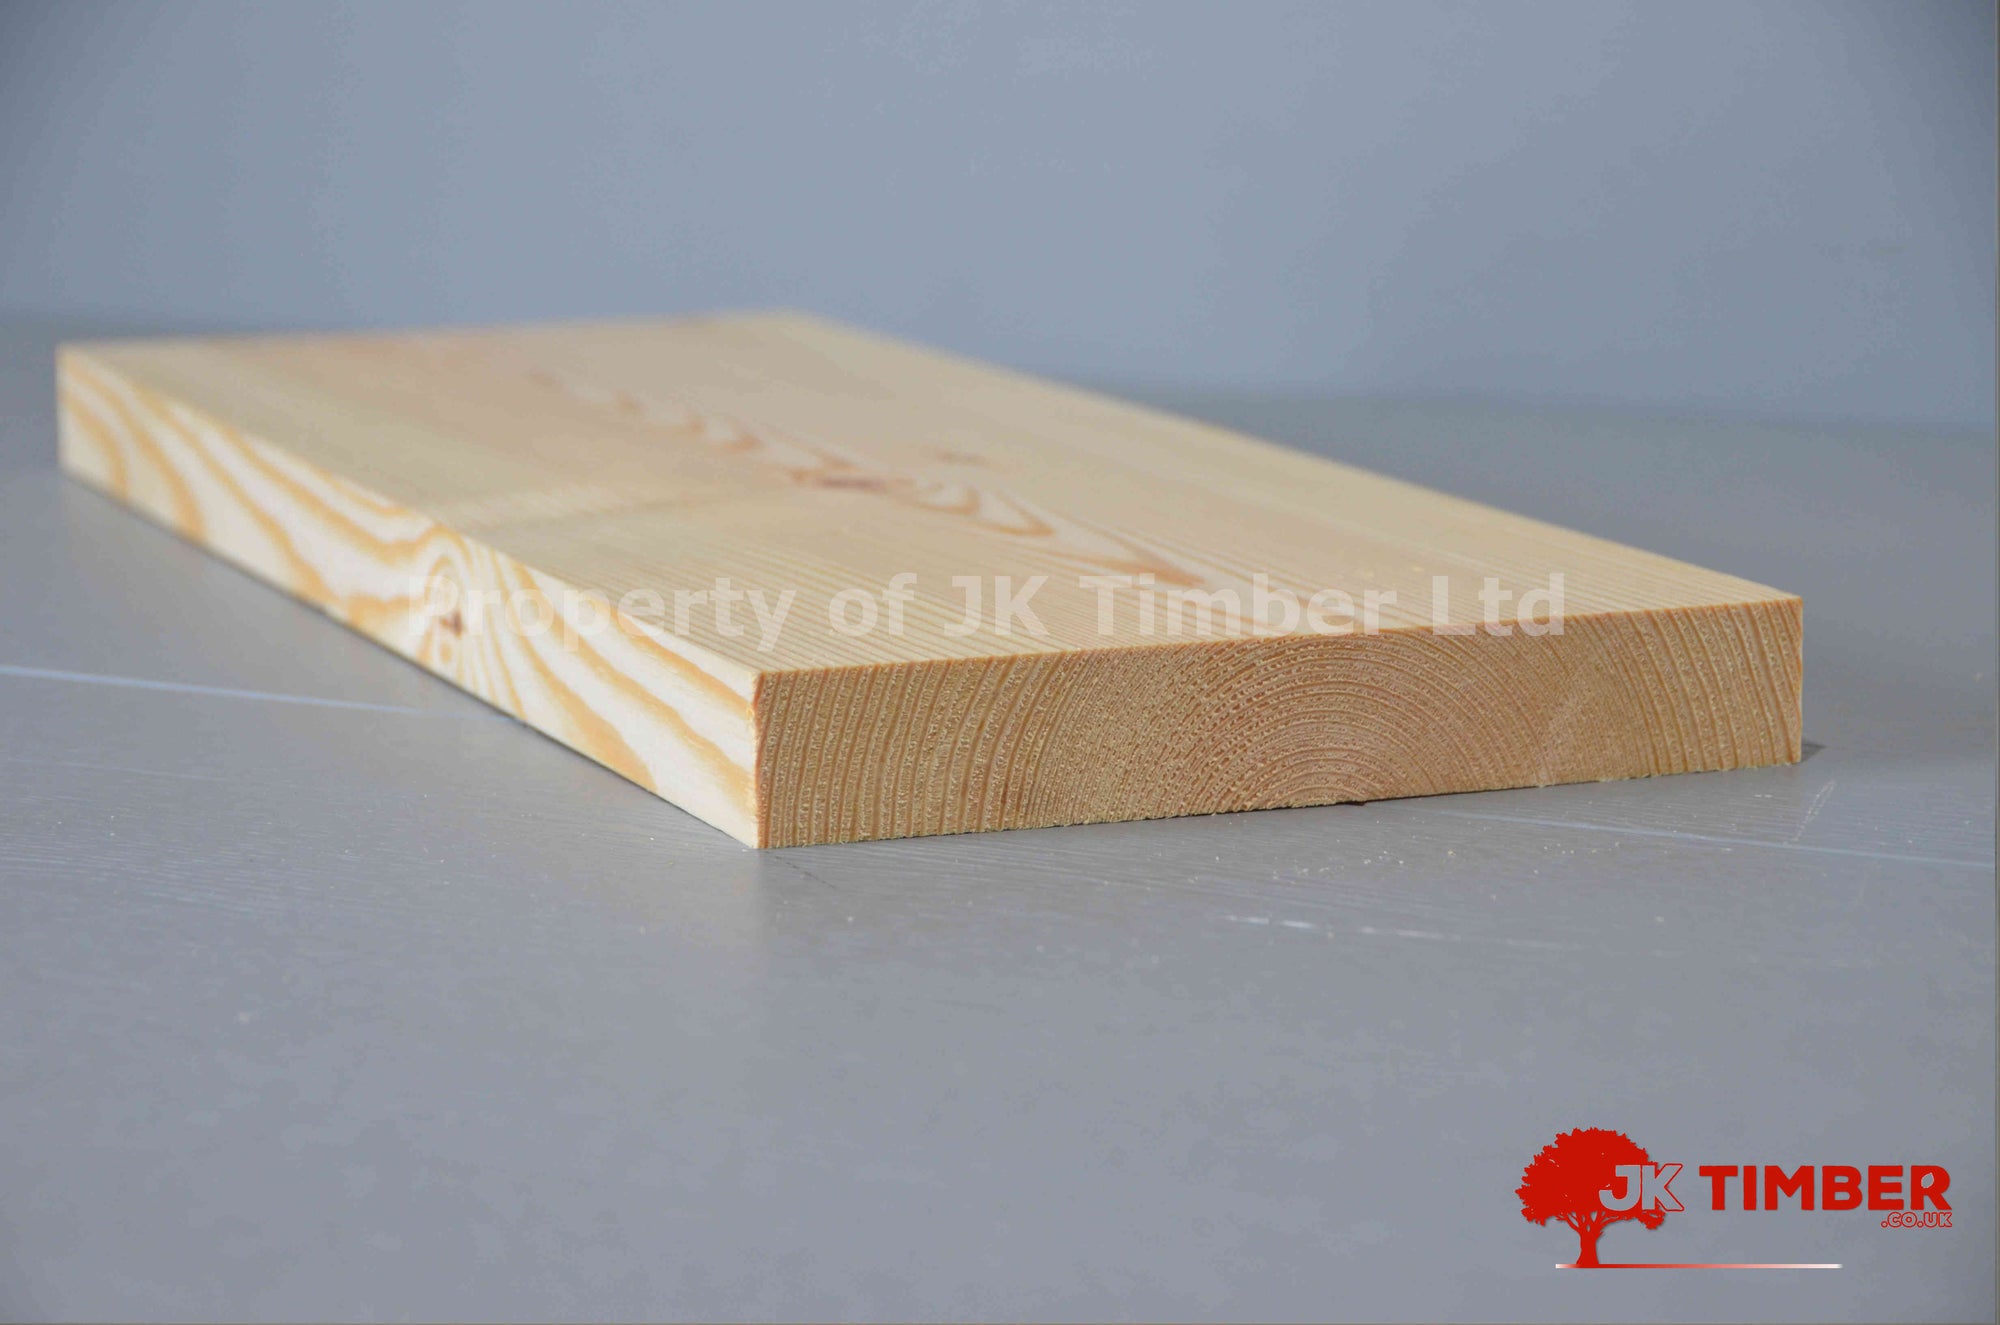 Planed Softwood Timber